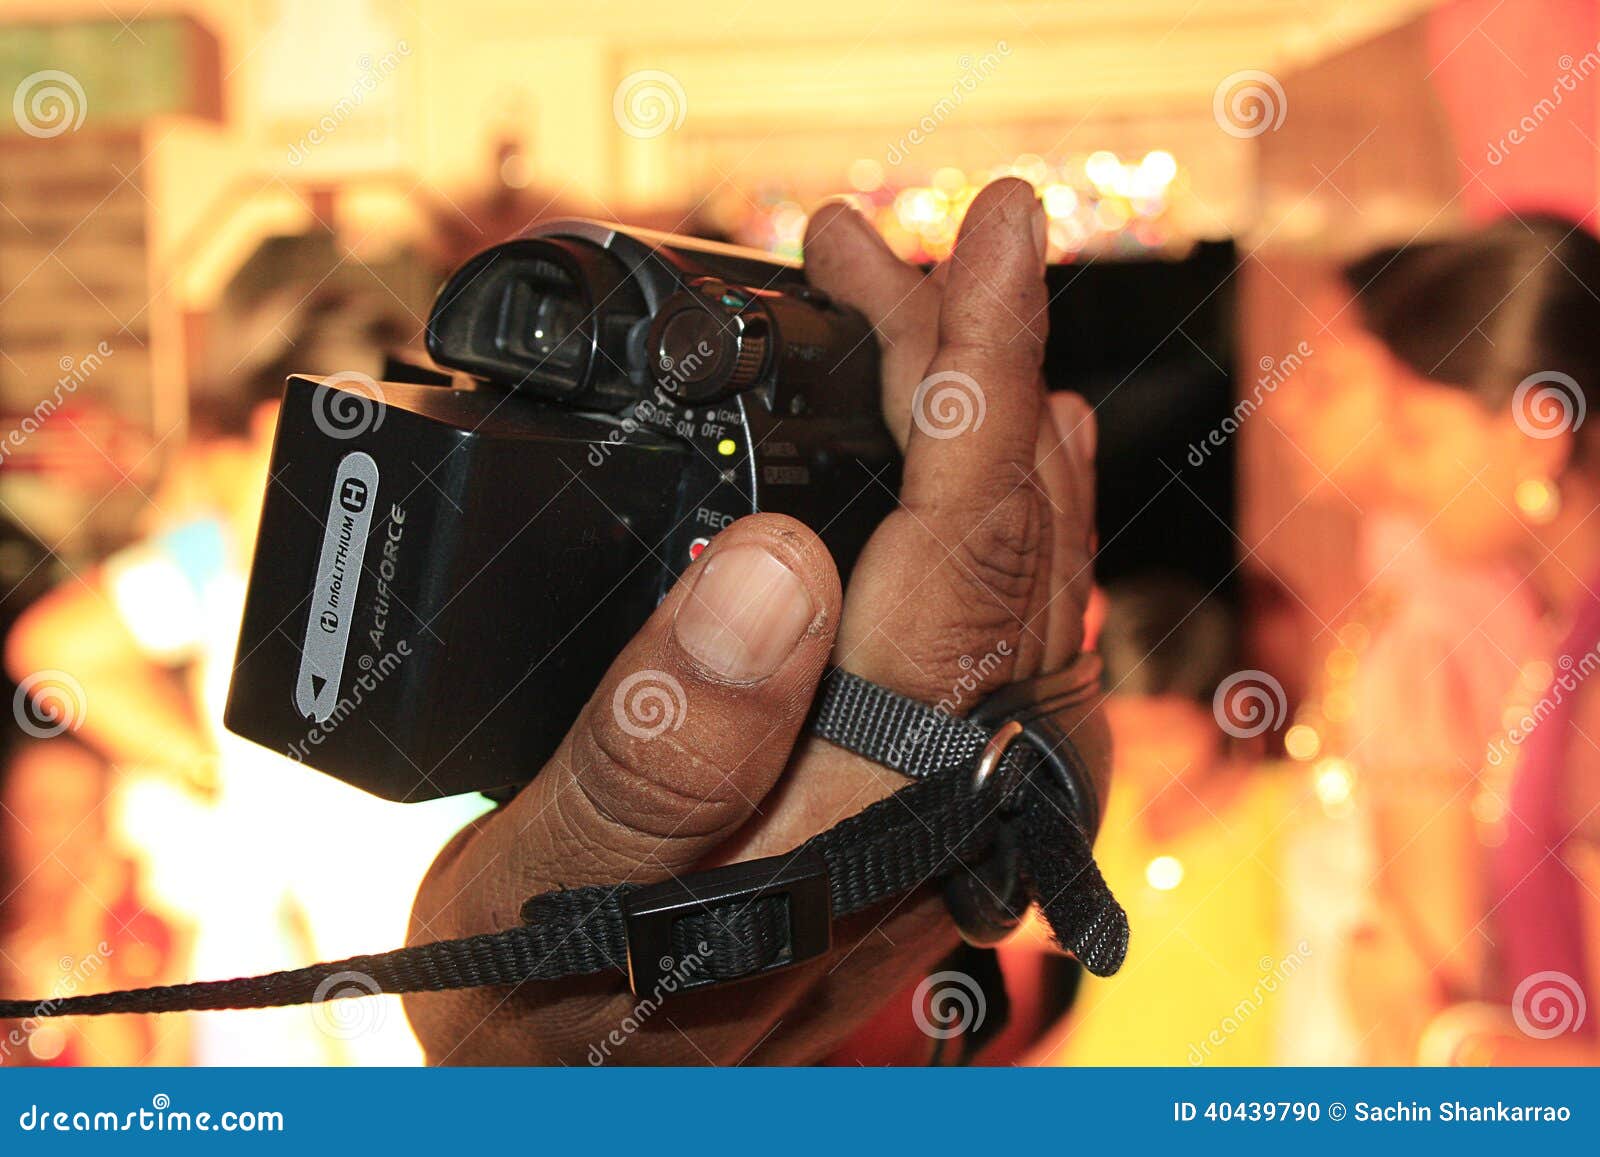 camera and mariage and video mariage